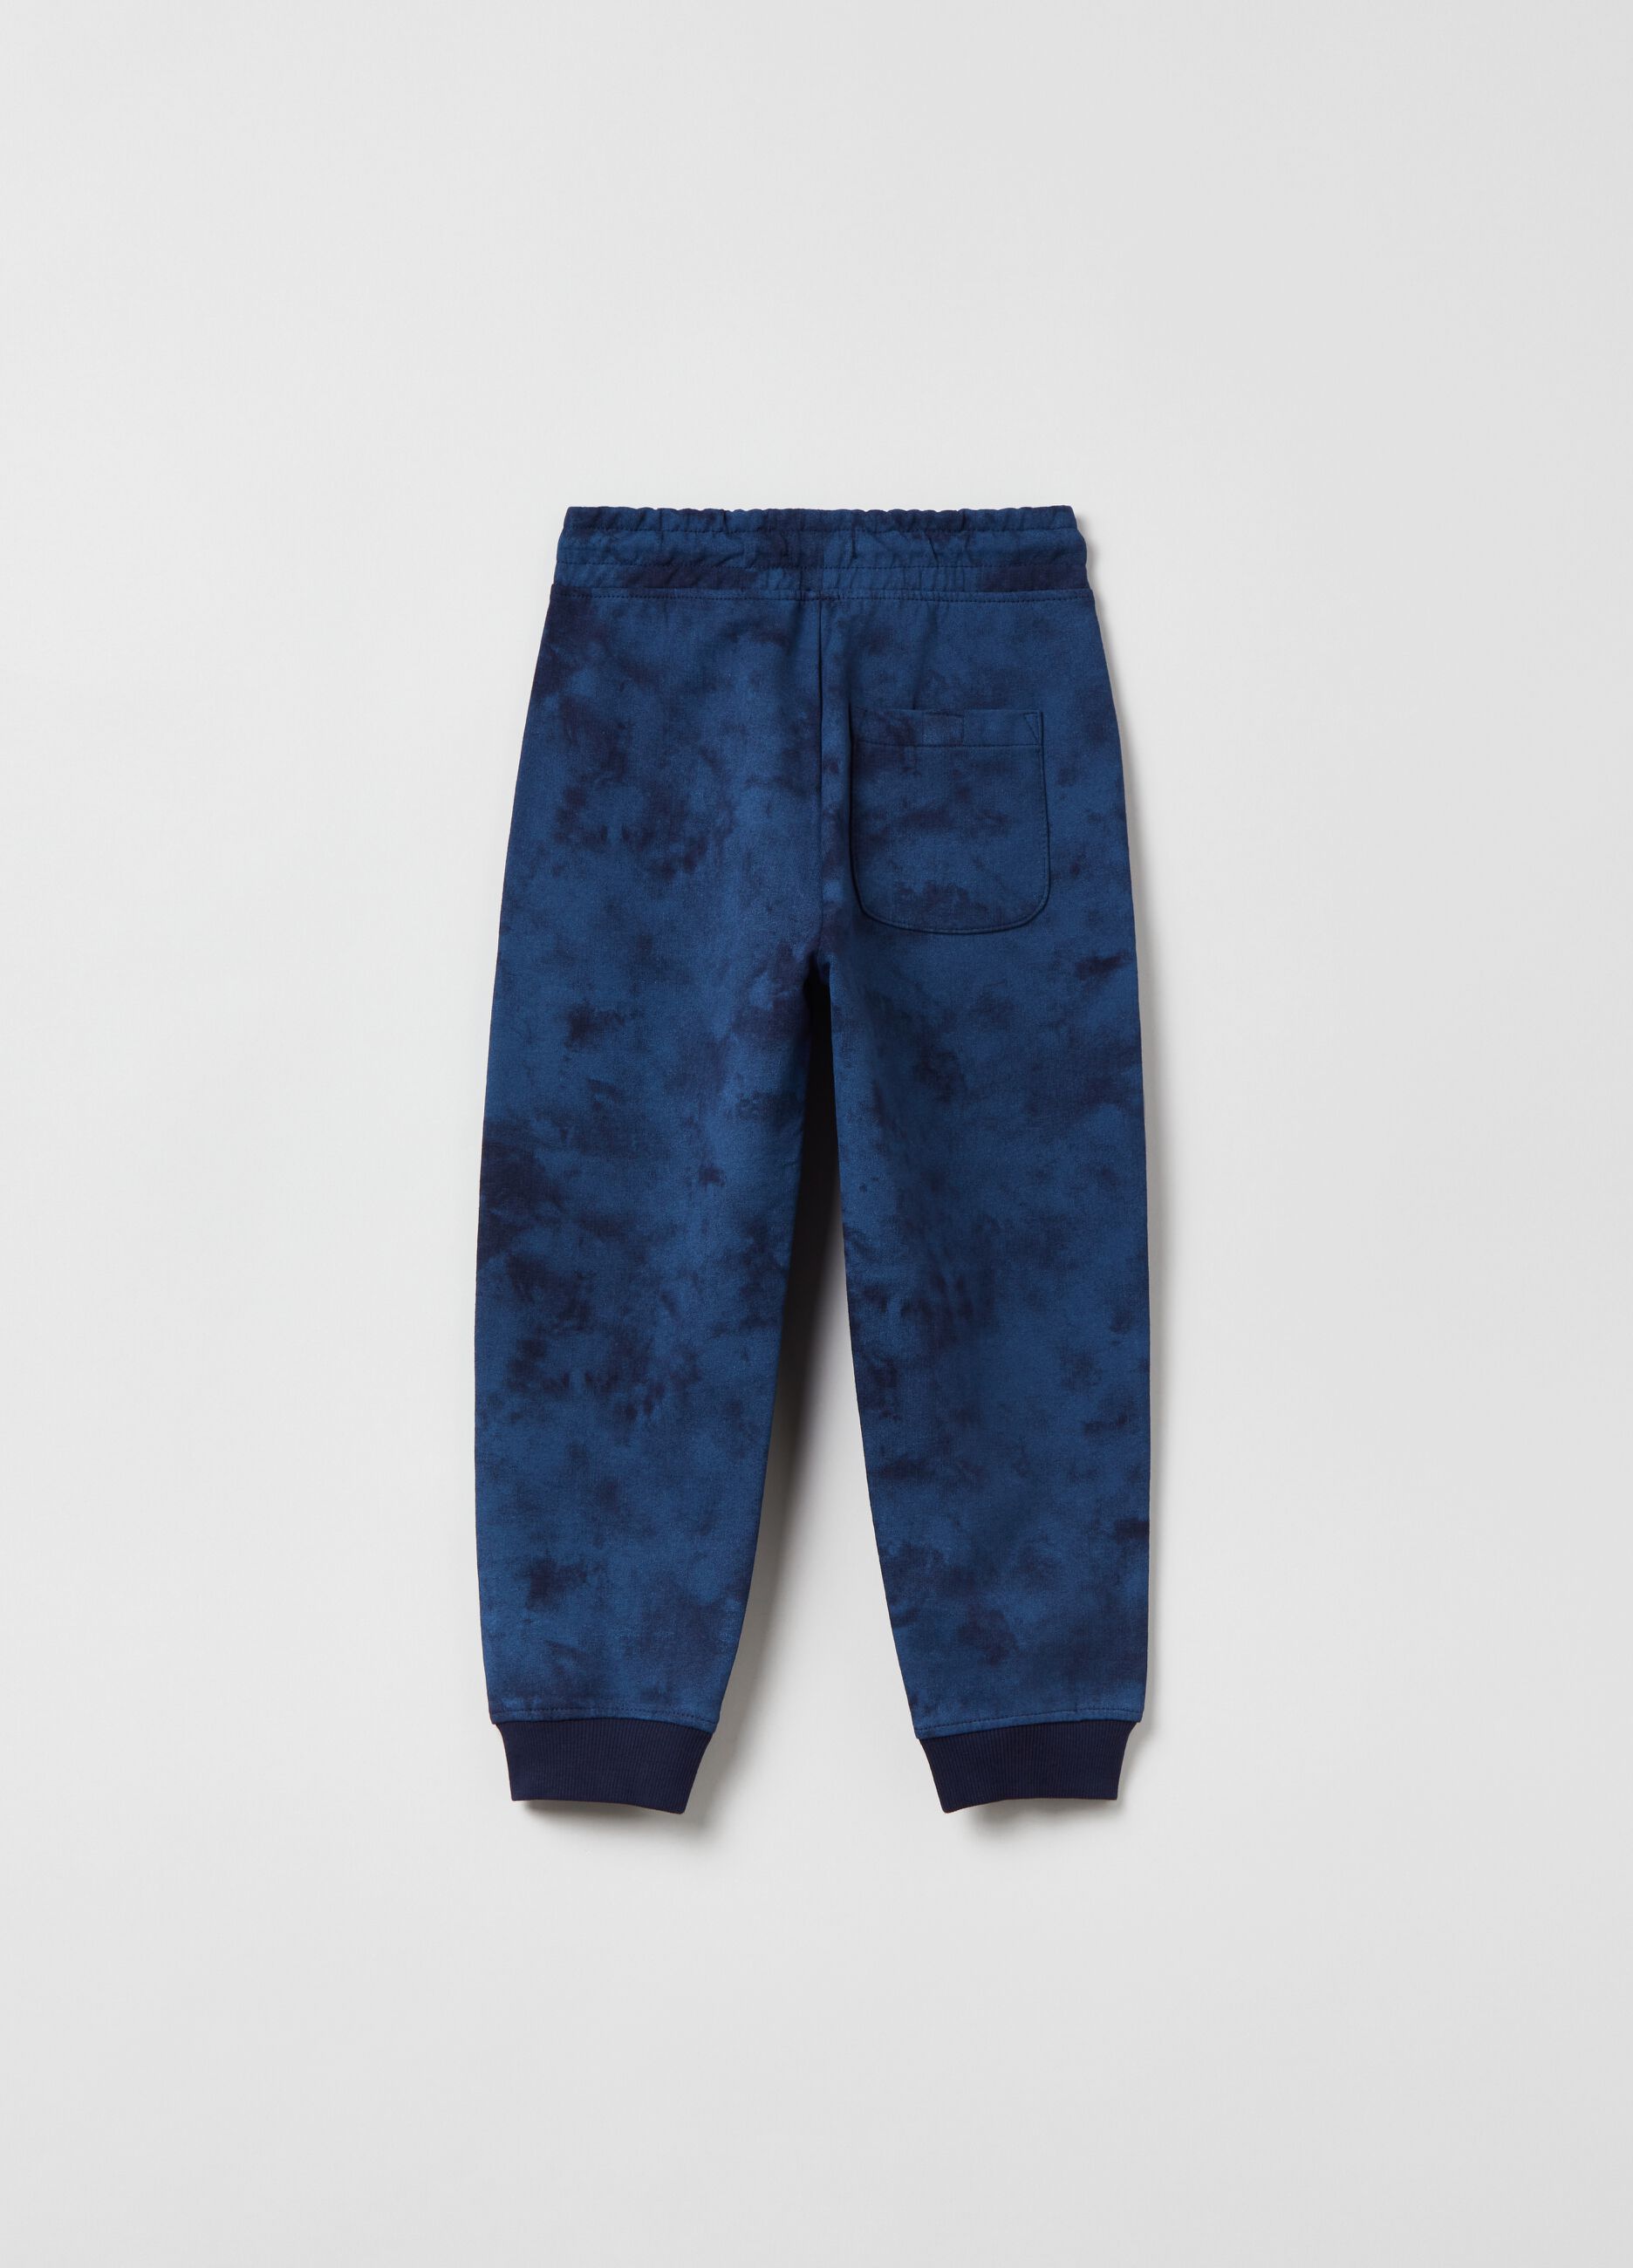 Tie Dye joggers with drawstring